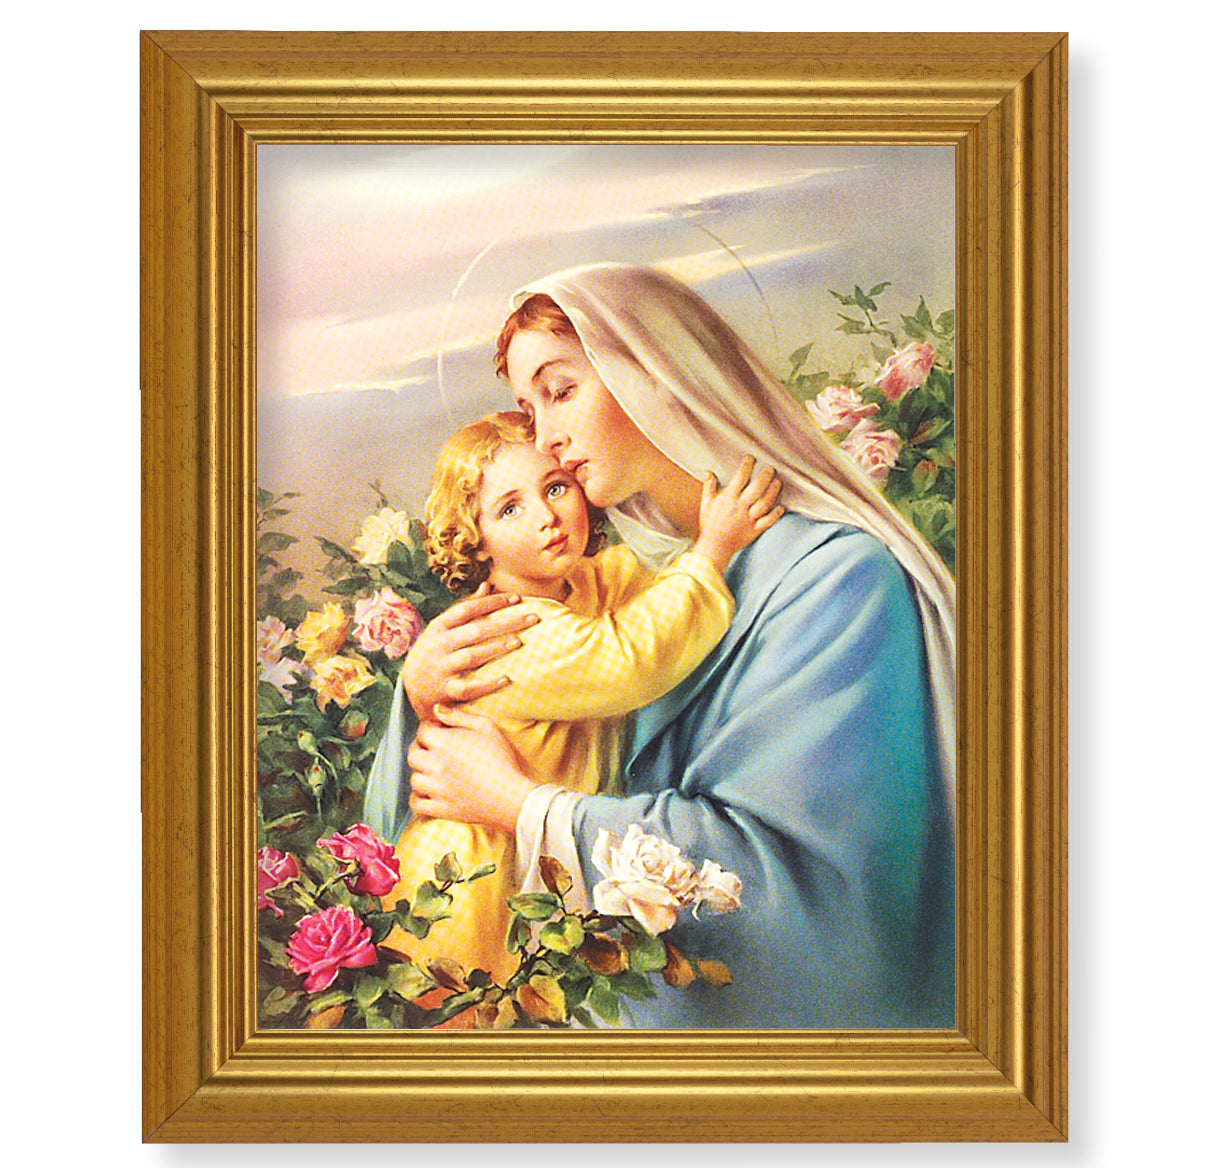 Madonna and Child Picture Framed Wall Art Decor, Large, Antique Gold-Leaf Classic Frame